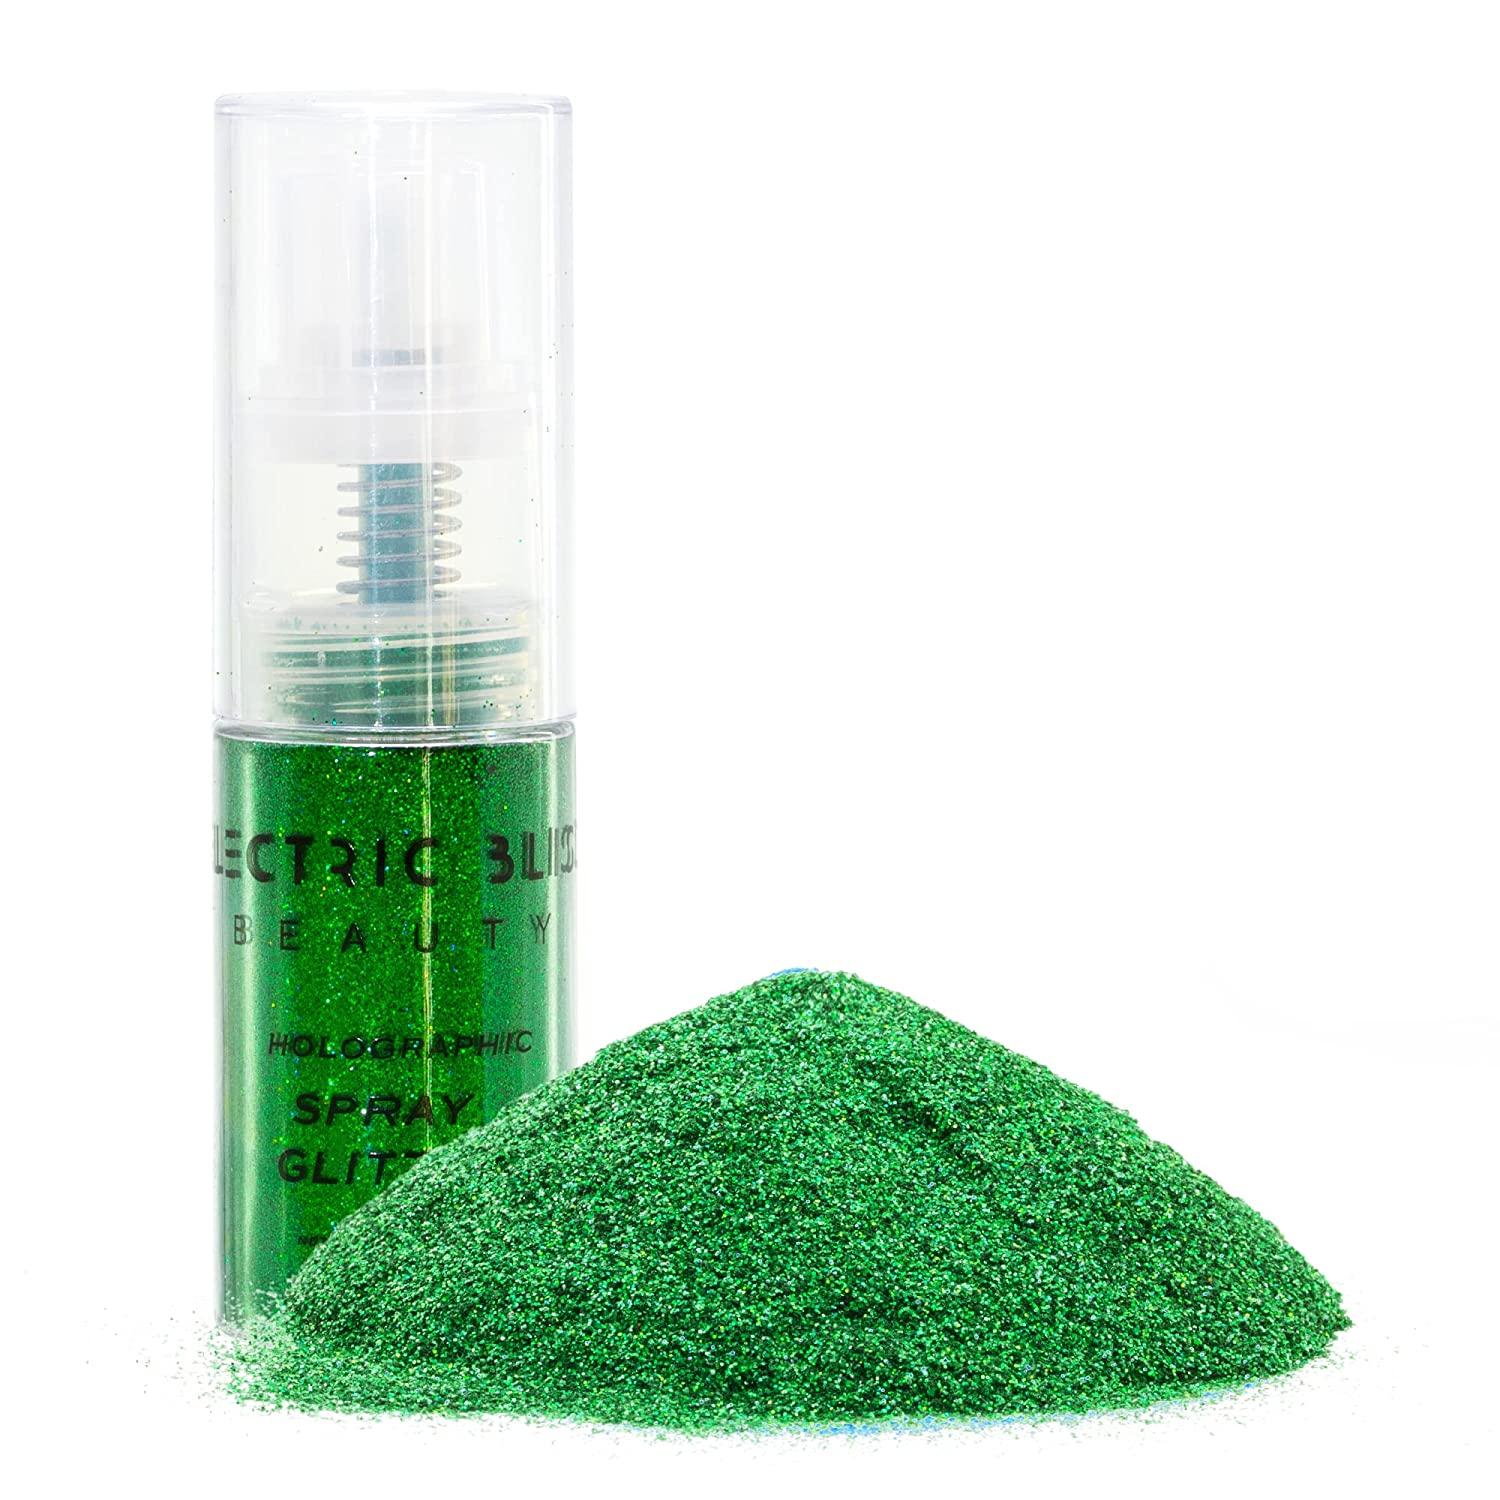 Green - 30 Grams Loose Glitter Spray - Holographic Glitter Spray - Cosmetic  Grade - Makeup Face Body Nail Festival Rave Beauty Craft (Green)